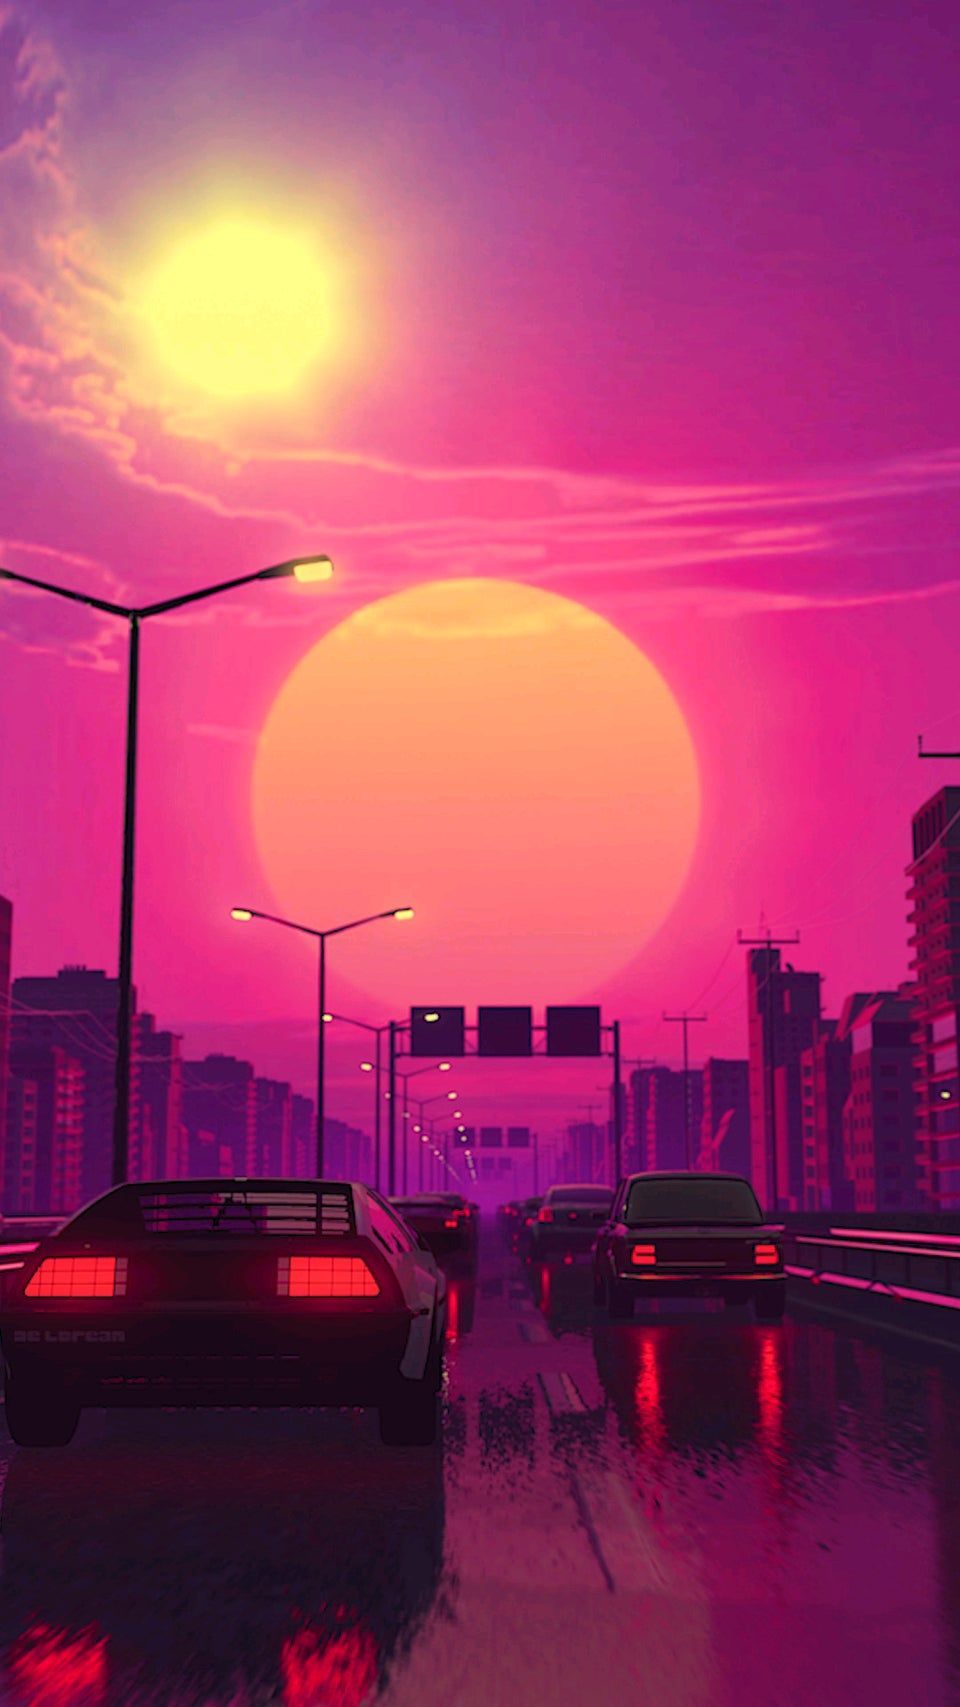 Reddit have any video wallpaper that are anime or lofi related or just have a c. Chill wallpaper, Vaporwave wallpaper, Scenery wallpaper